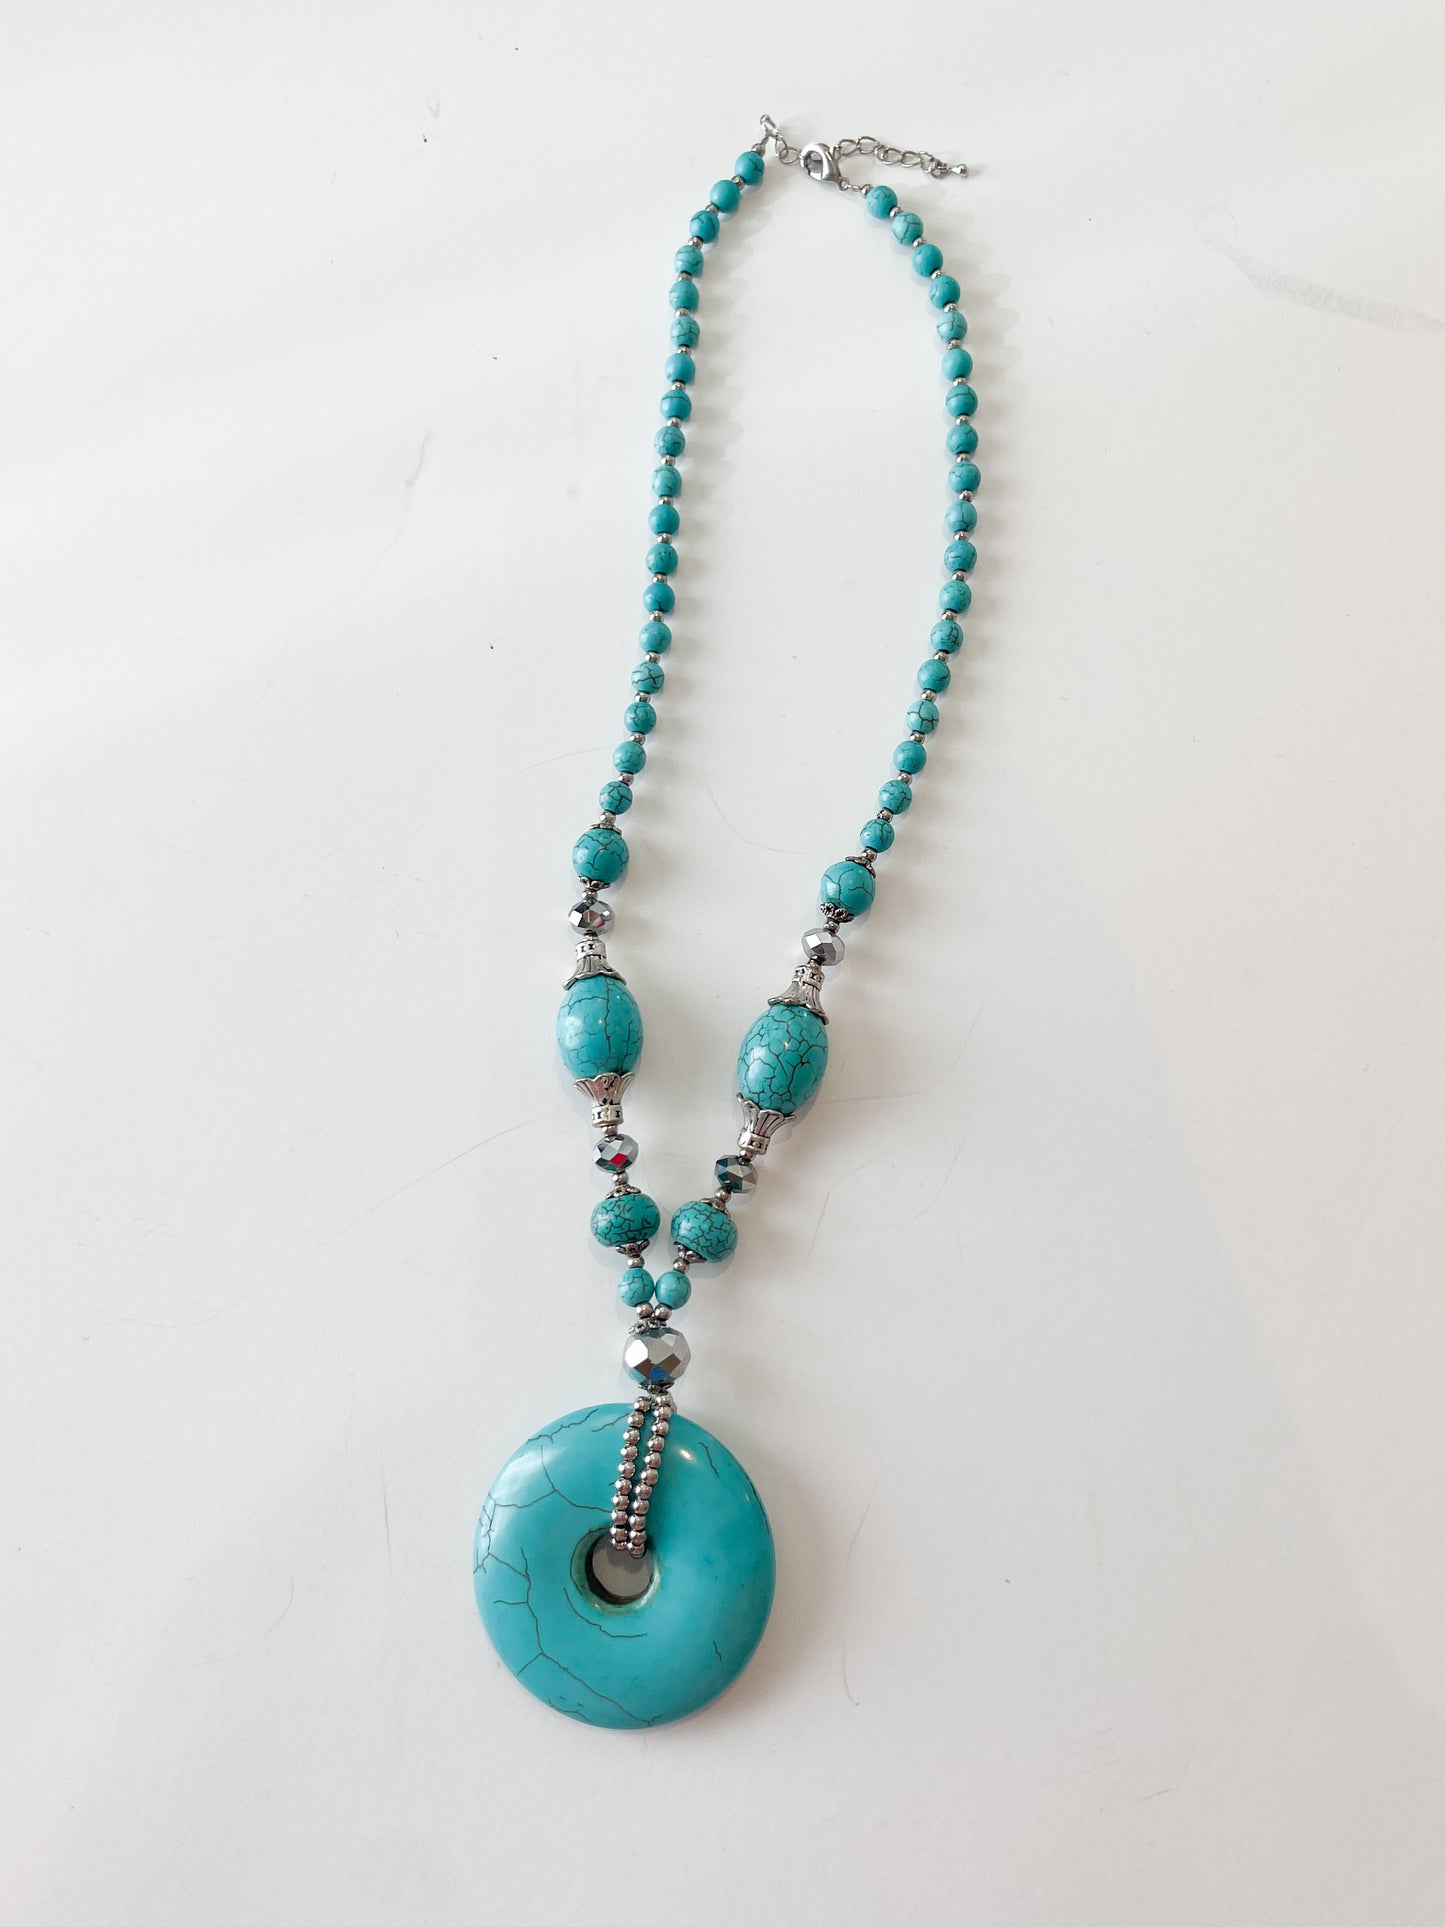 Turquoise-Like Beaded Pendent Necklace